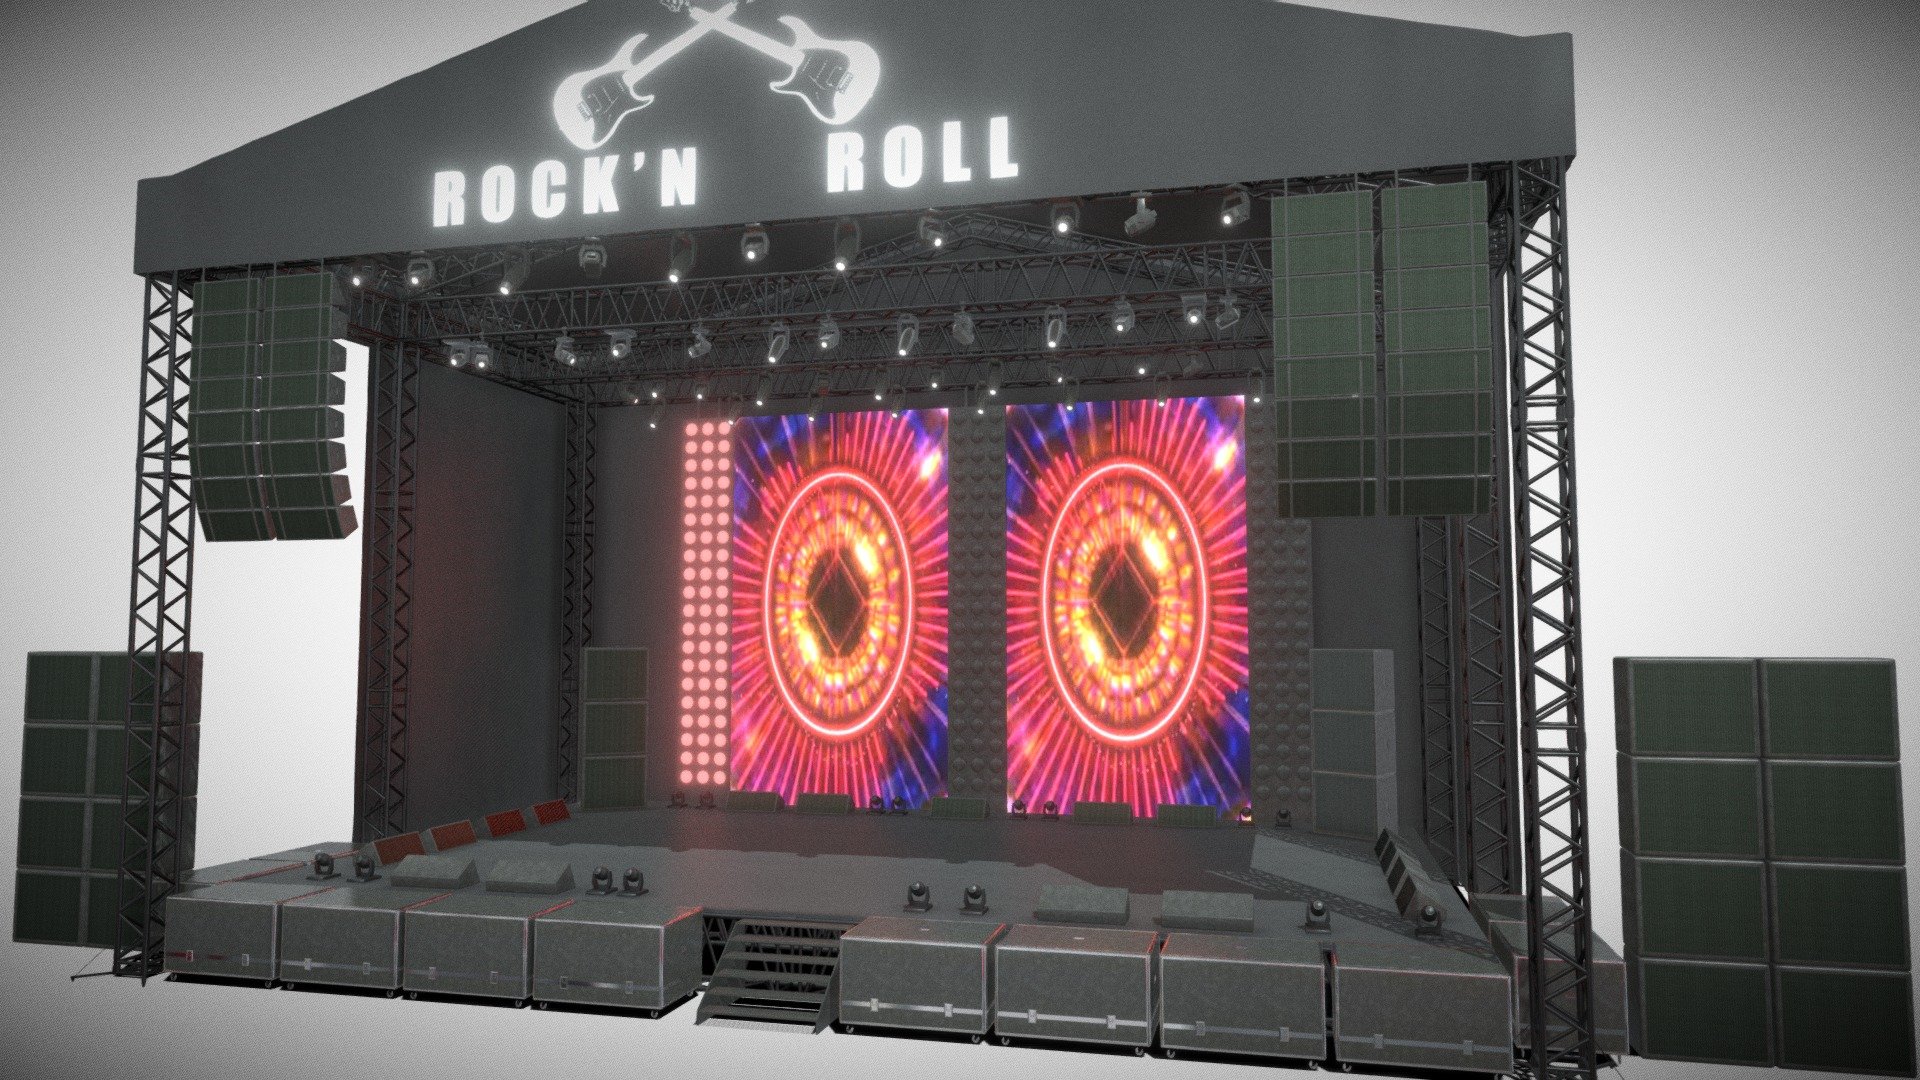 3D Concert Stage can be an impressive element for your projects.
Low polygon, realistic image, realistic coatings, fast rendering, there are many materials inside 3d model